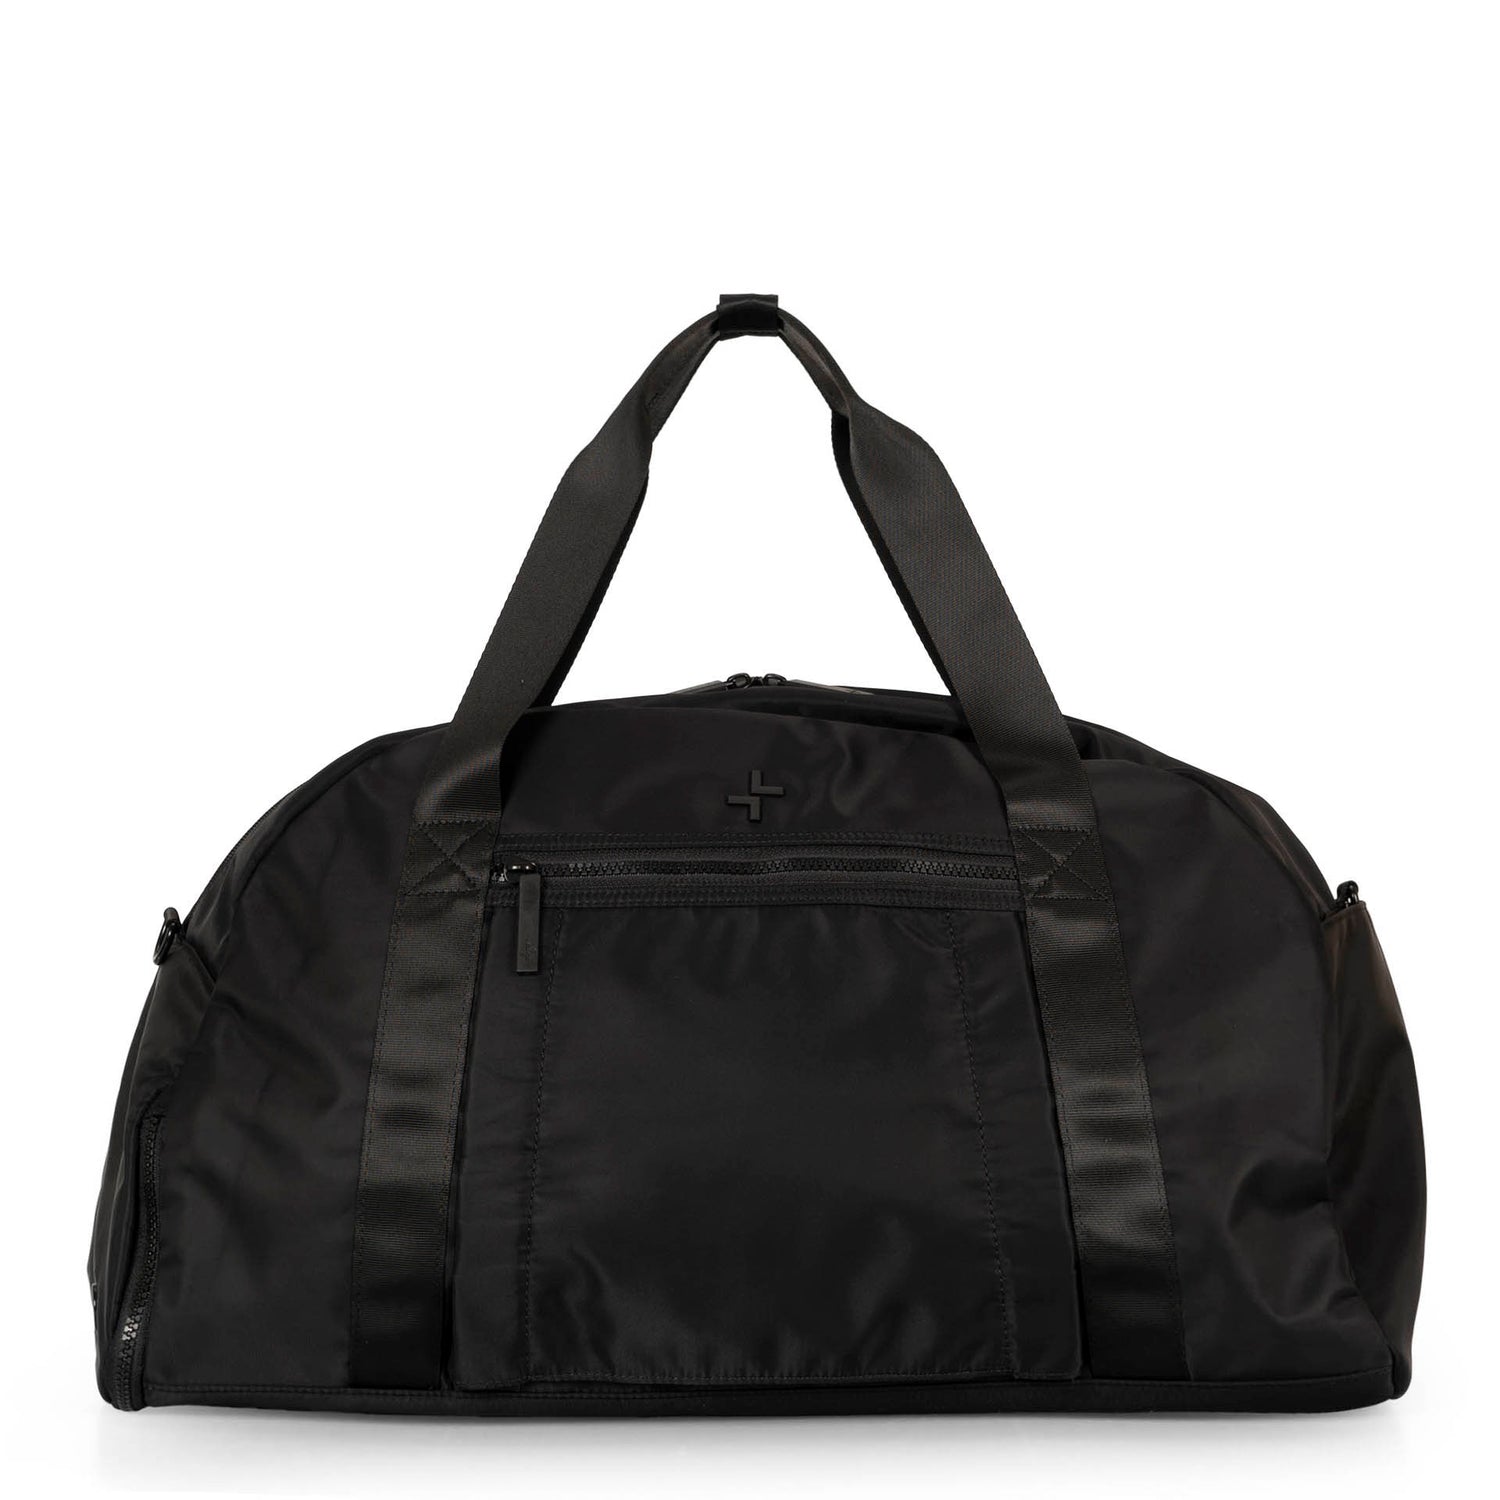 Front side of a black duffle bag called Sutton designed by Tracker on a white background, showcasing its top handle, front zipper pocket and 2 side pockets.